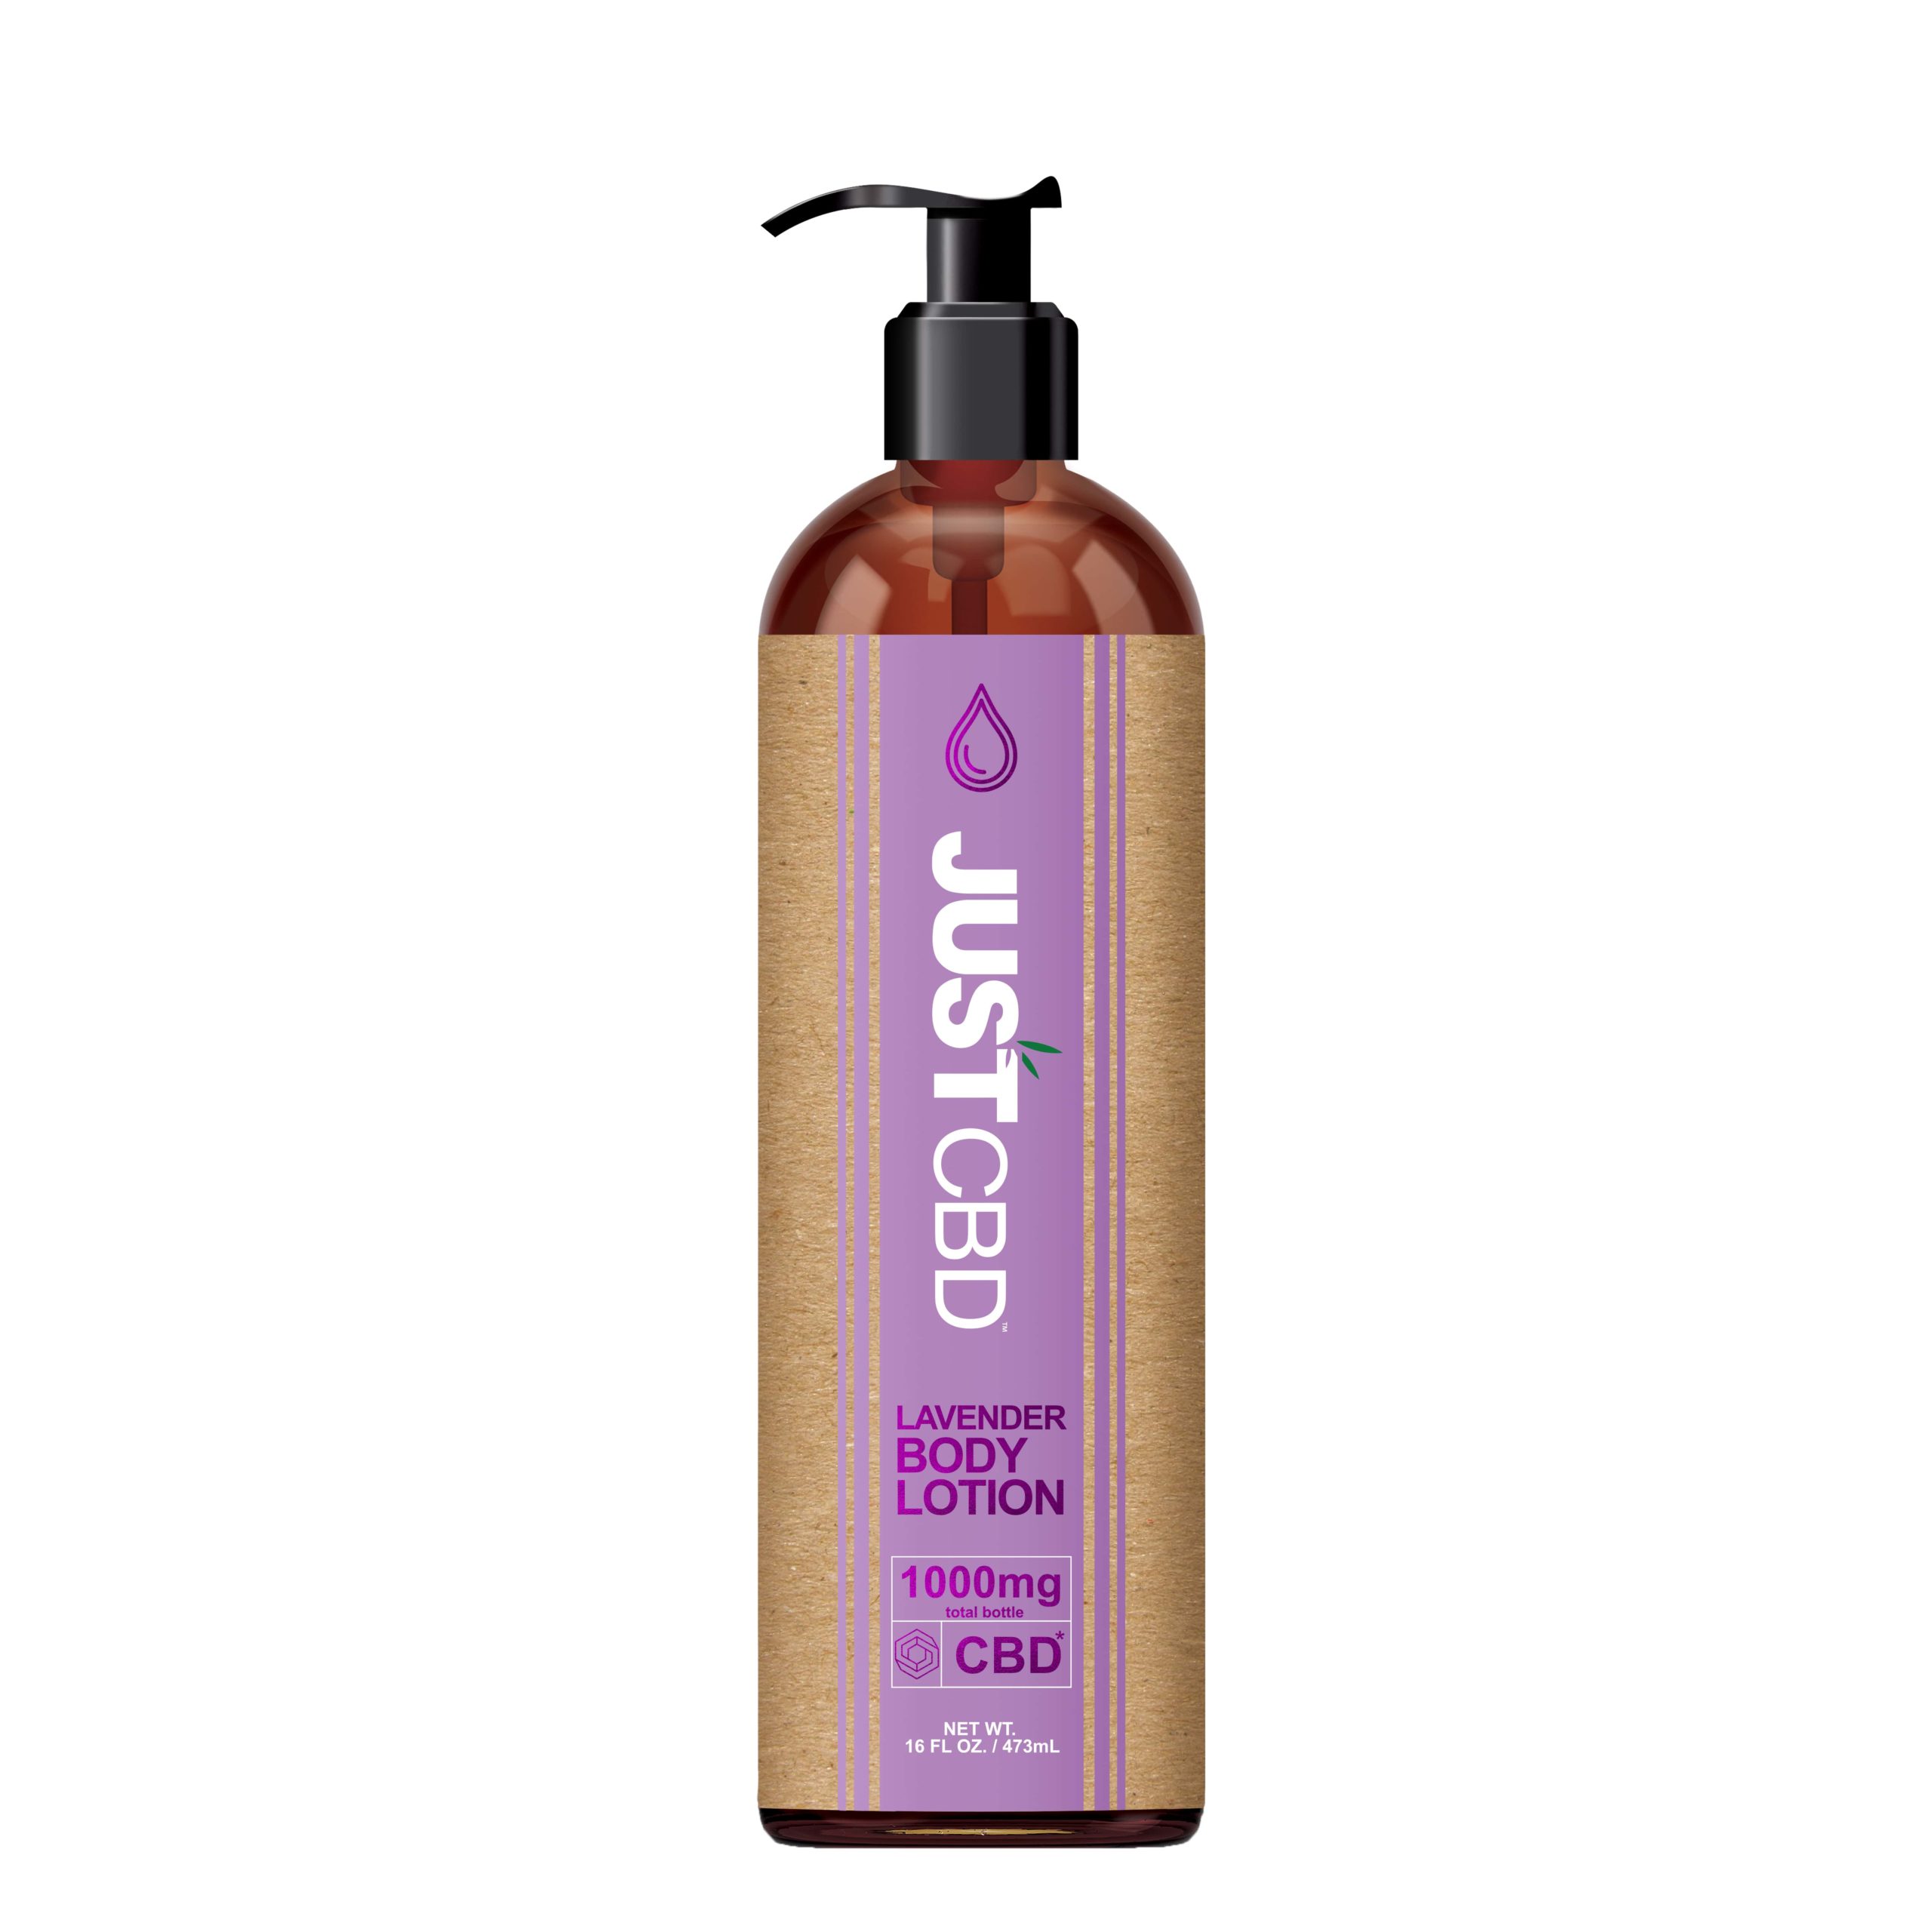 JustCBD Body Lotion Lavender 1000mg Best Price